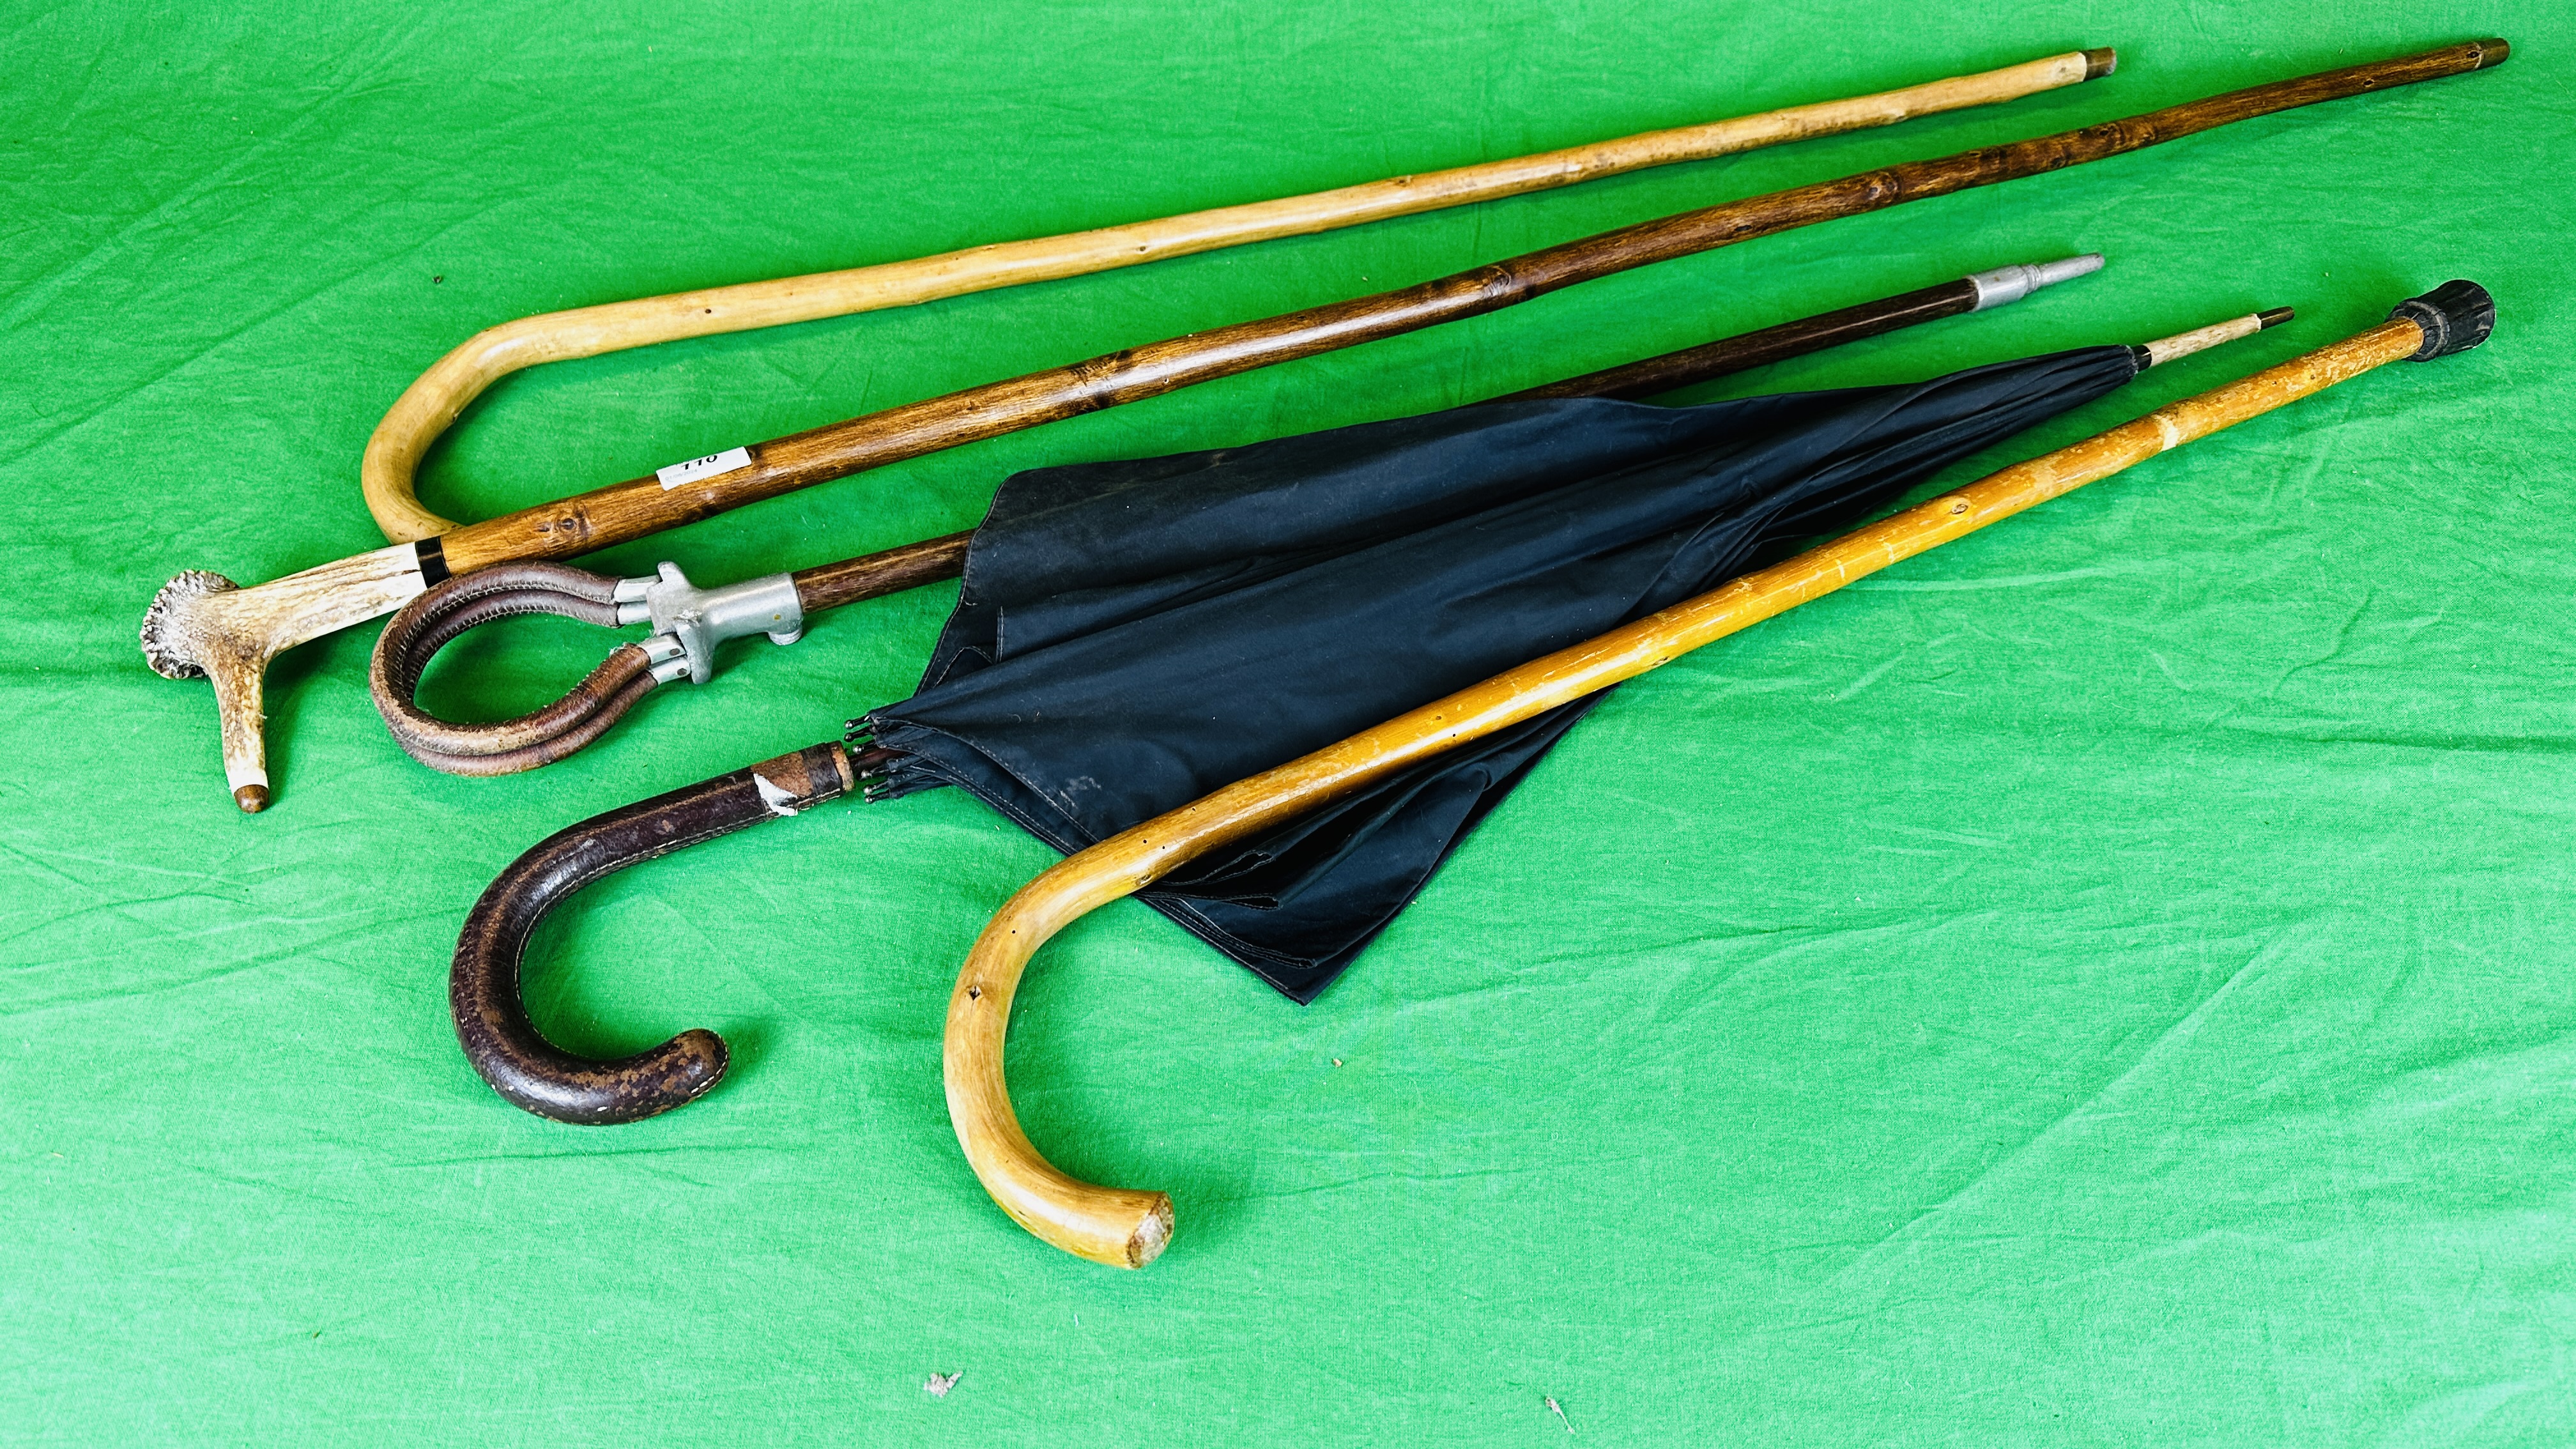 A HORN HANDLED WALKING STICK, SHOOTING STICK, TWO OTHER WALKING STICKS AND UMBRELLA.